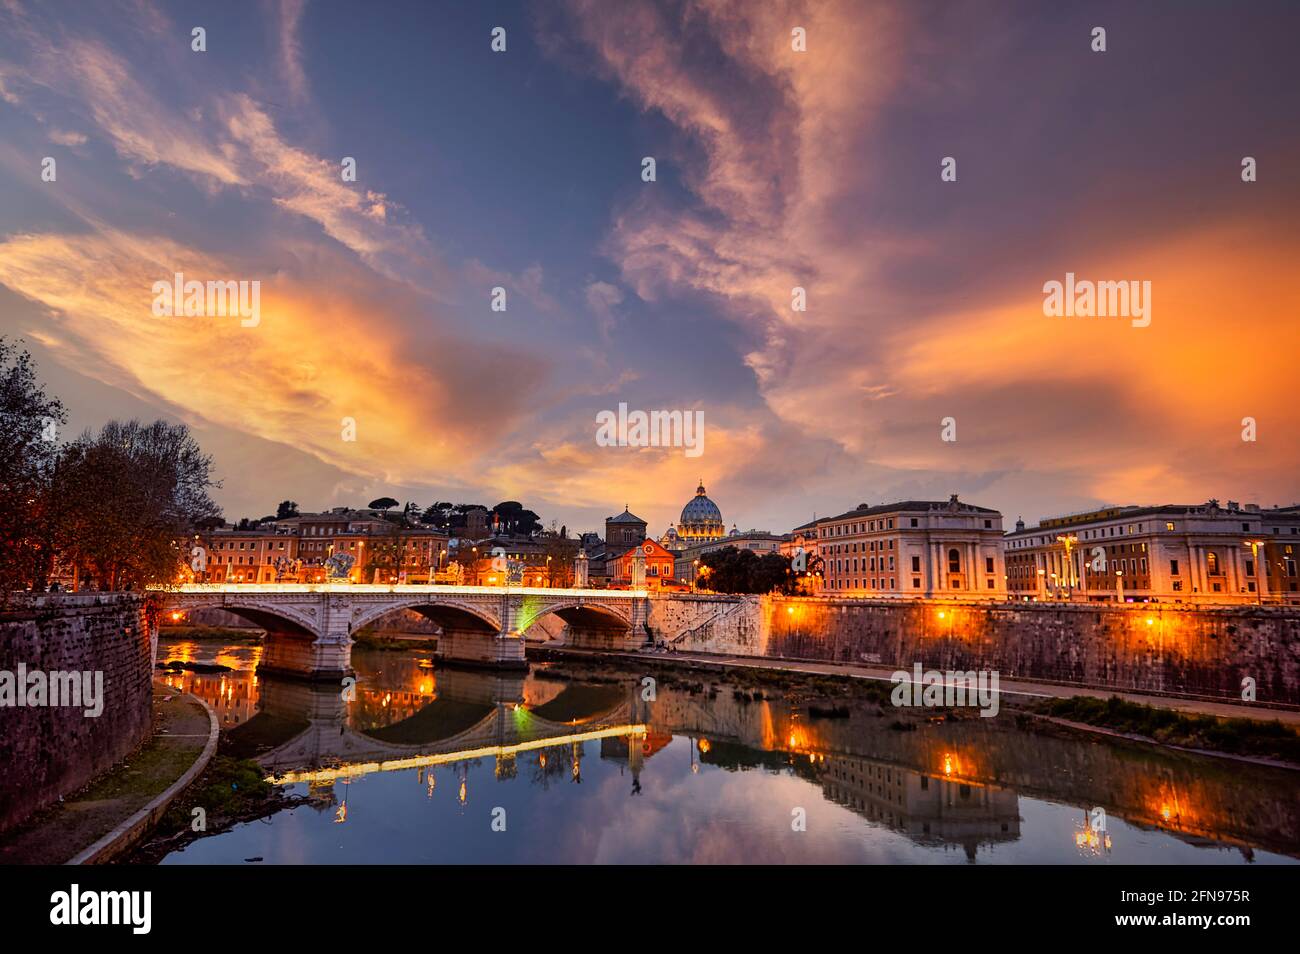 View of the Tiber River and Saint Peter's Basilica at sunset in Rome Italy Stock Photo